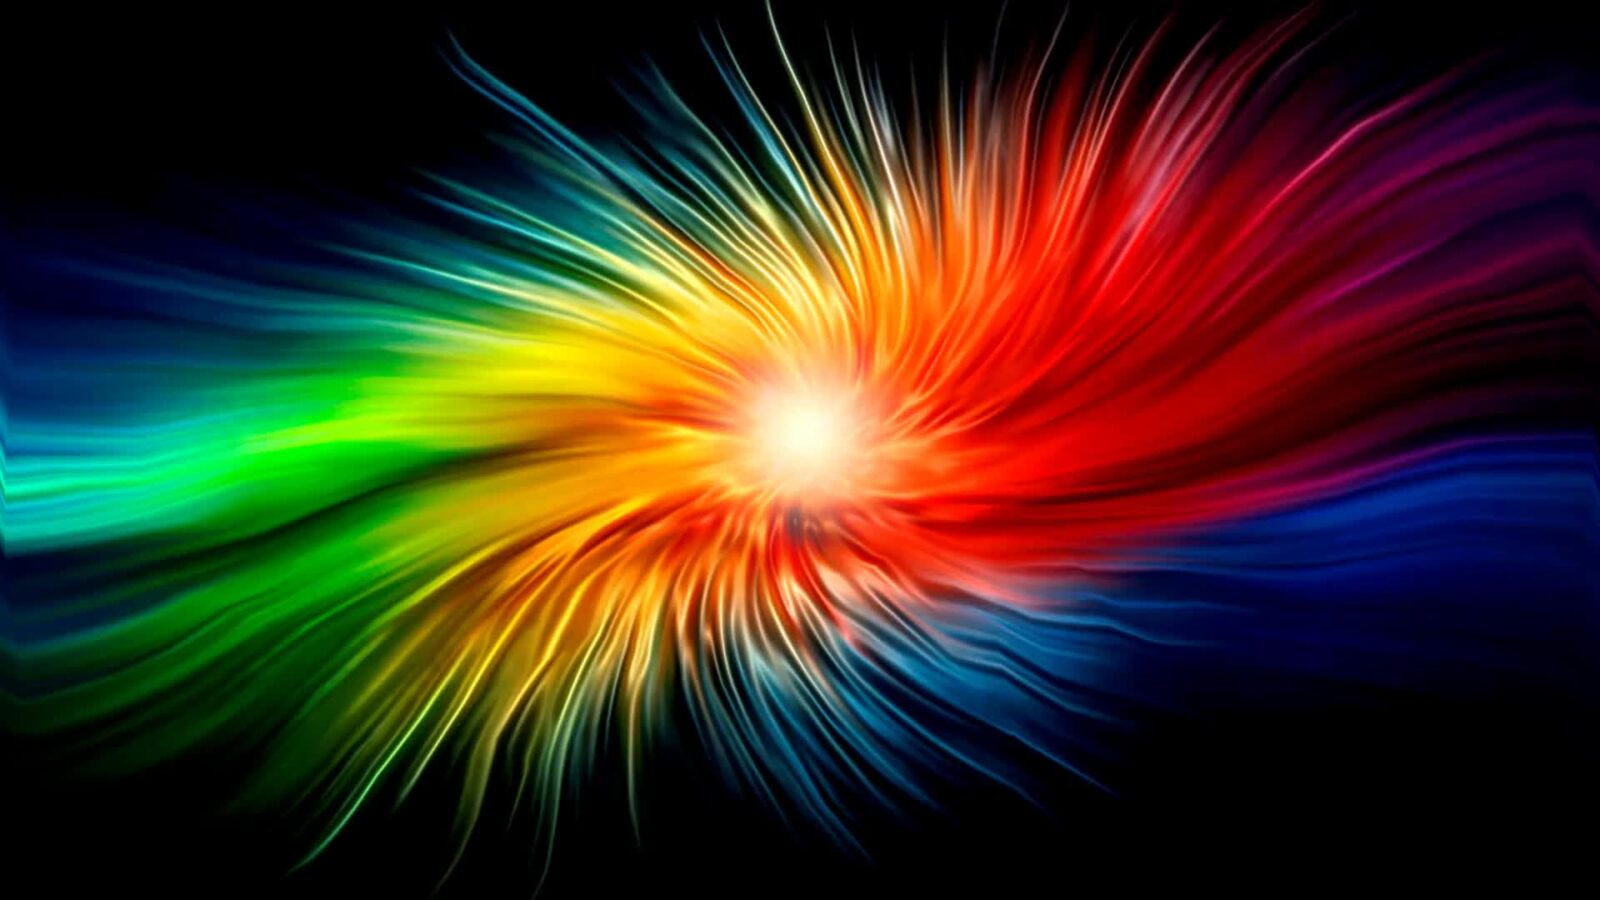 Cool Colorful Rainbow Abstract Art - Free Desktop Wallpaper